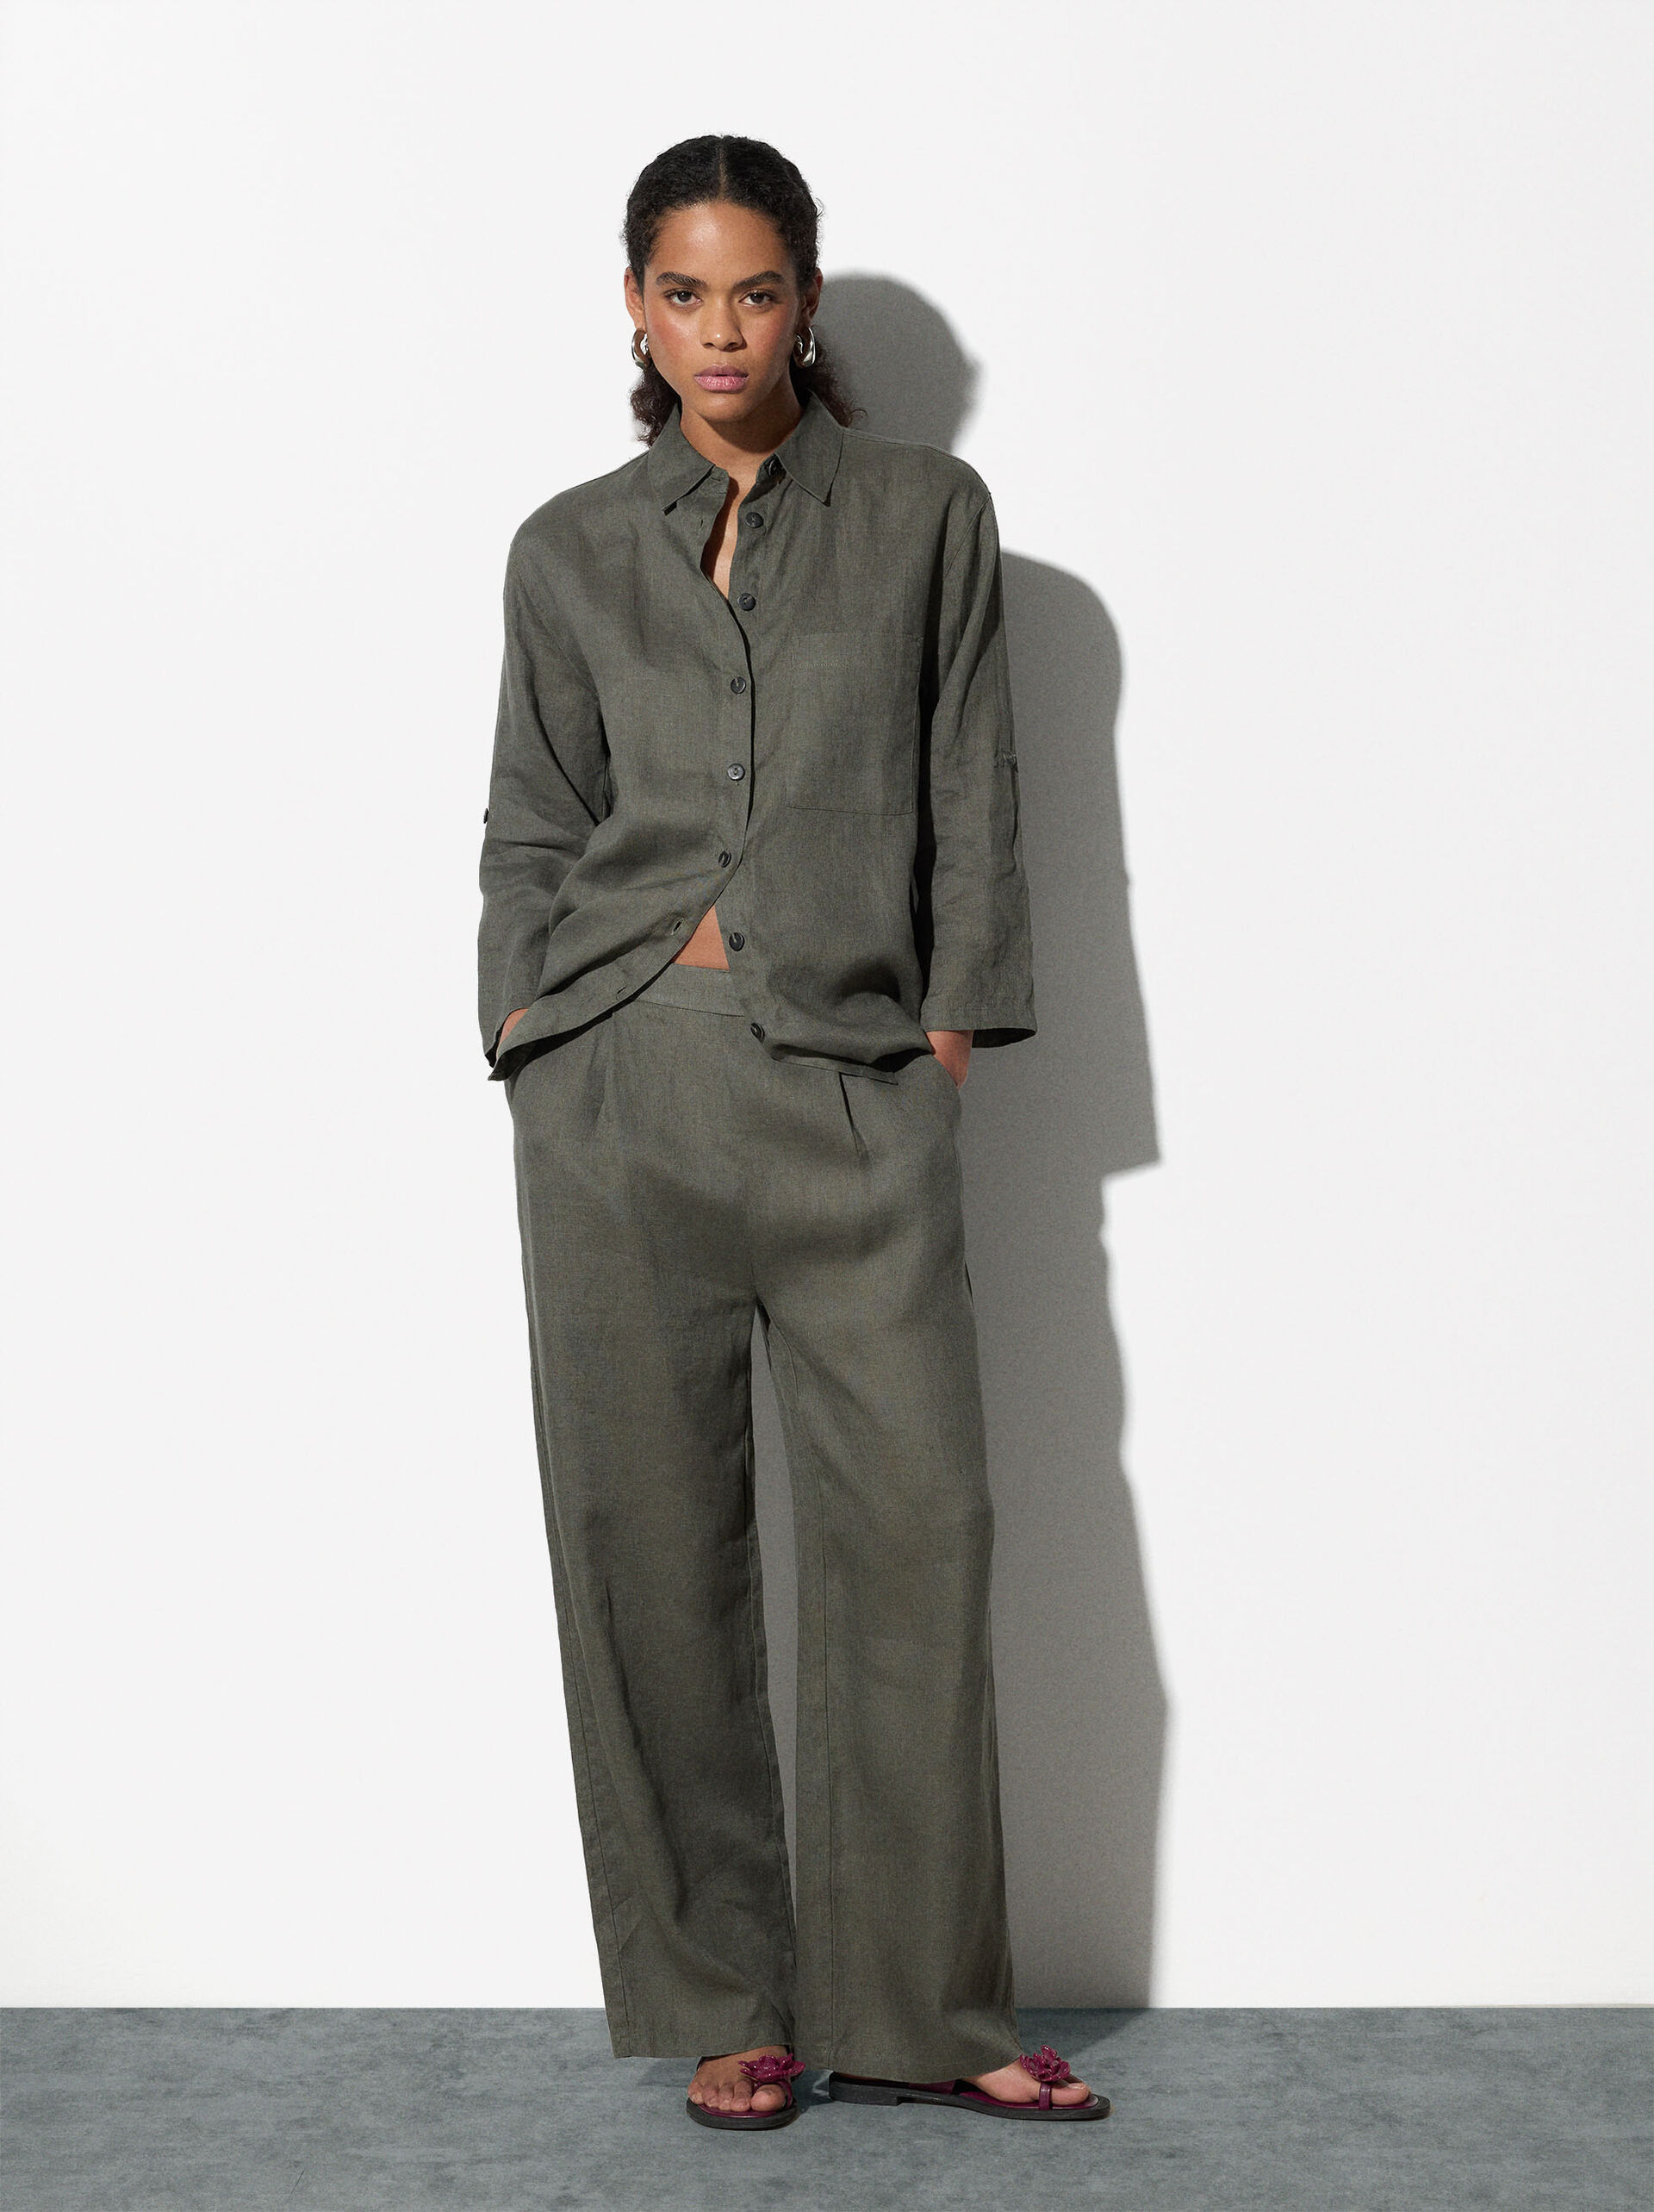 100% Linen Trousers image number 1.0